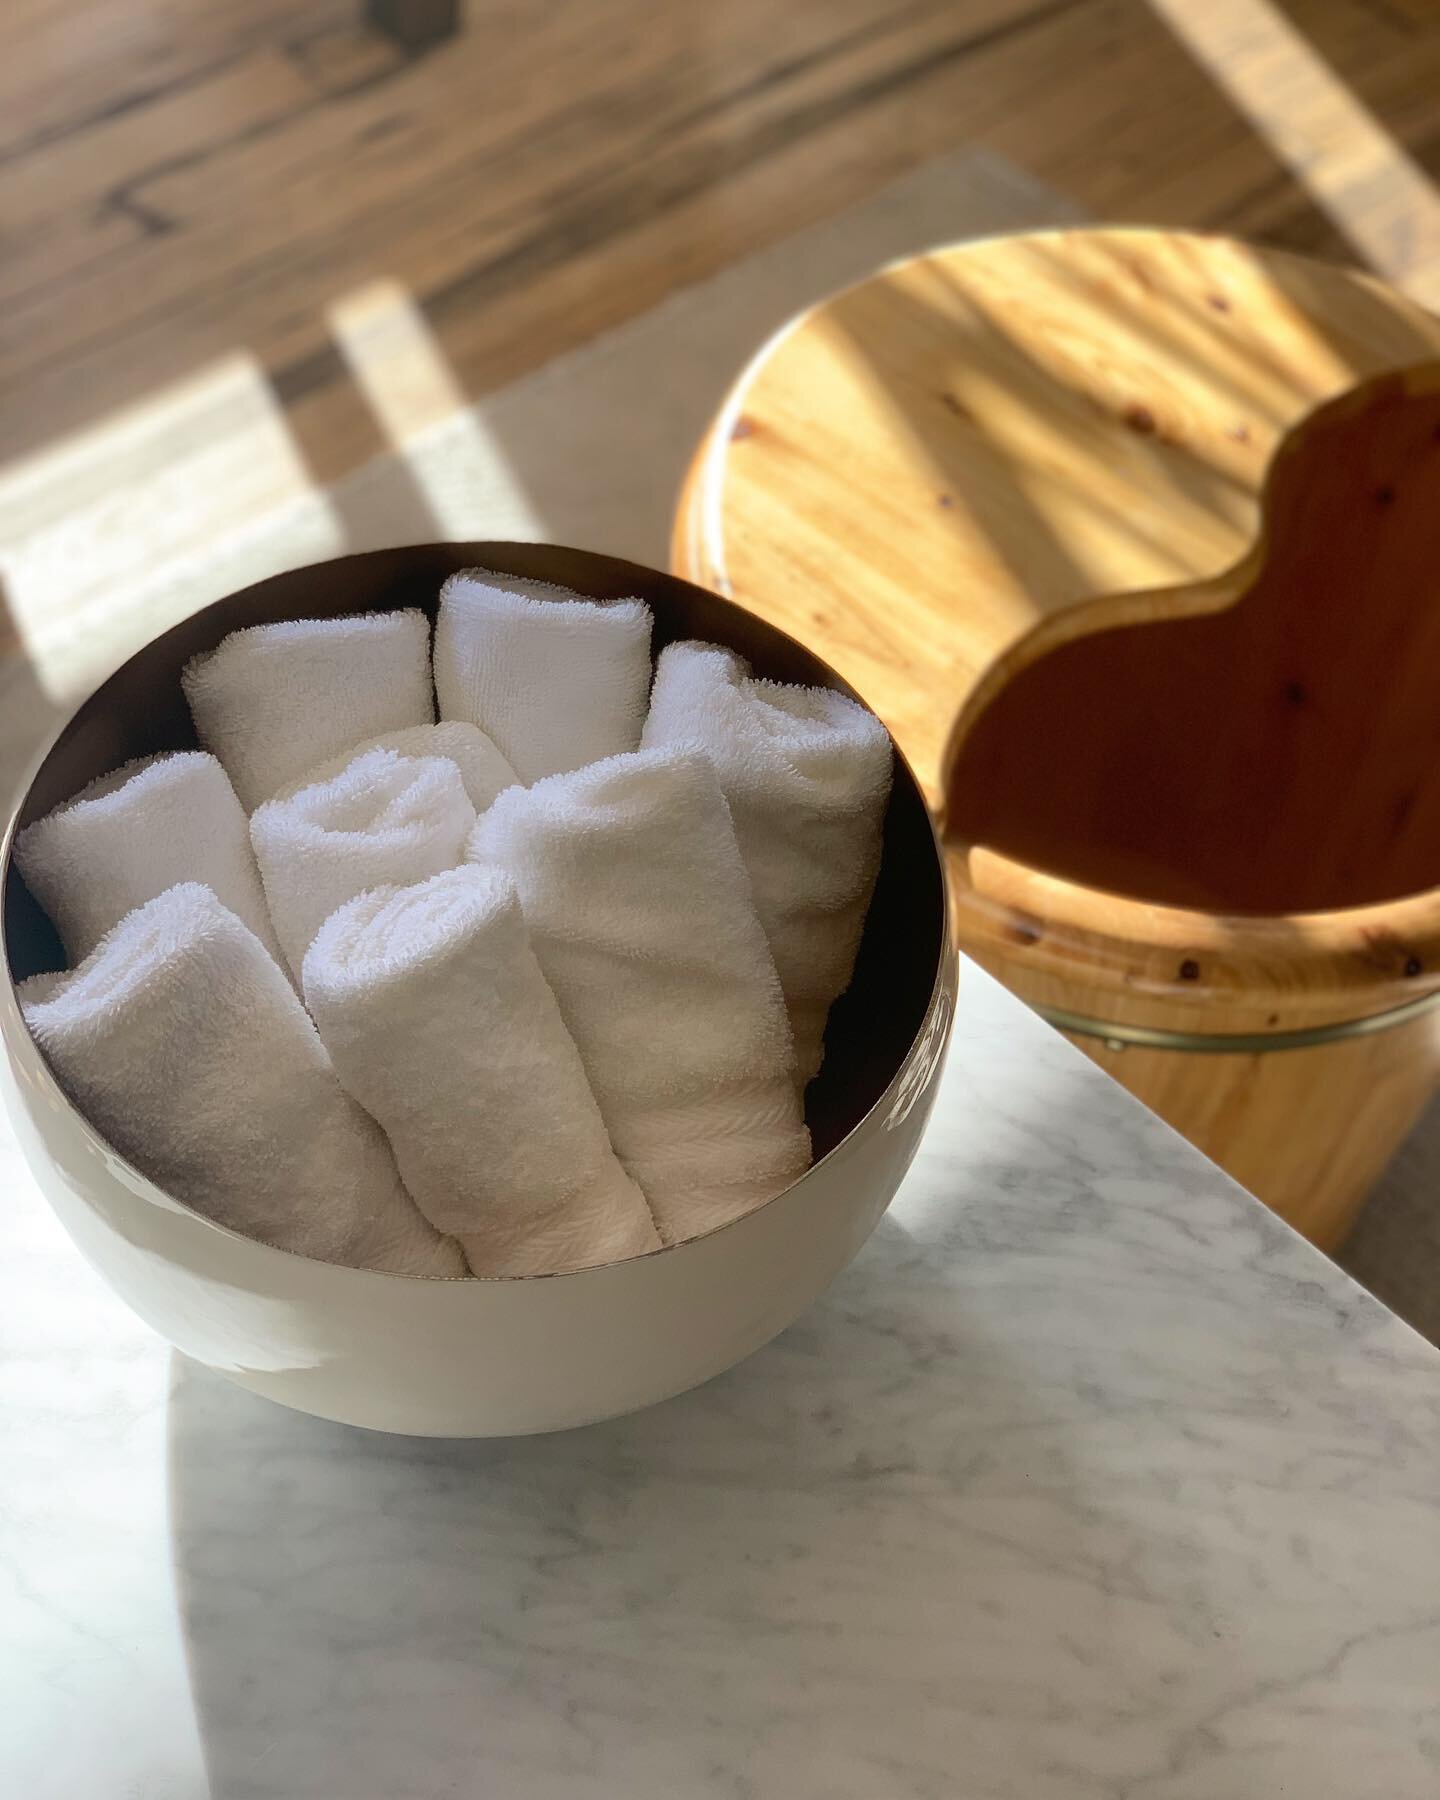 SOAK + SWEAT

Available on Tuesday through Friday

SOAK: Tibetan foot-baths supporting fatigue, insomnia, candida overgrowth, neuropathy, arthritis, and much more

SWEAT: far infrared red sauna sessions to calm inflammation, improve cardiovascular he